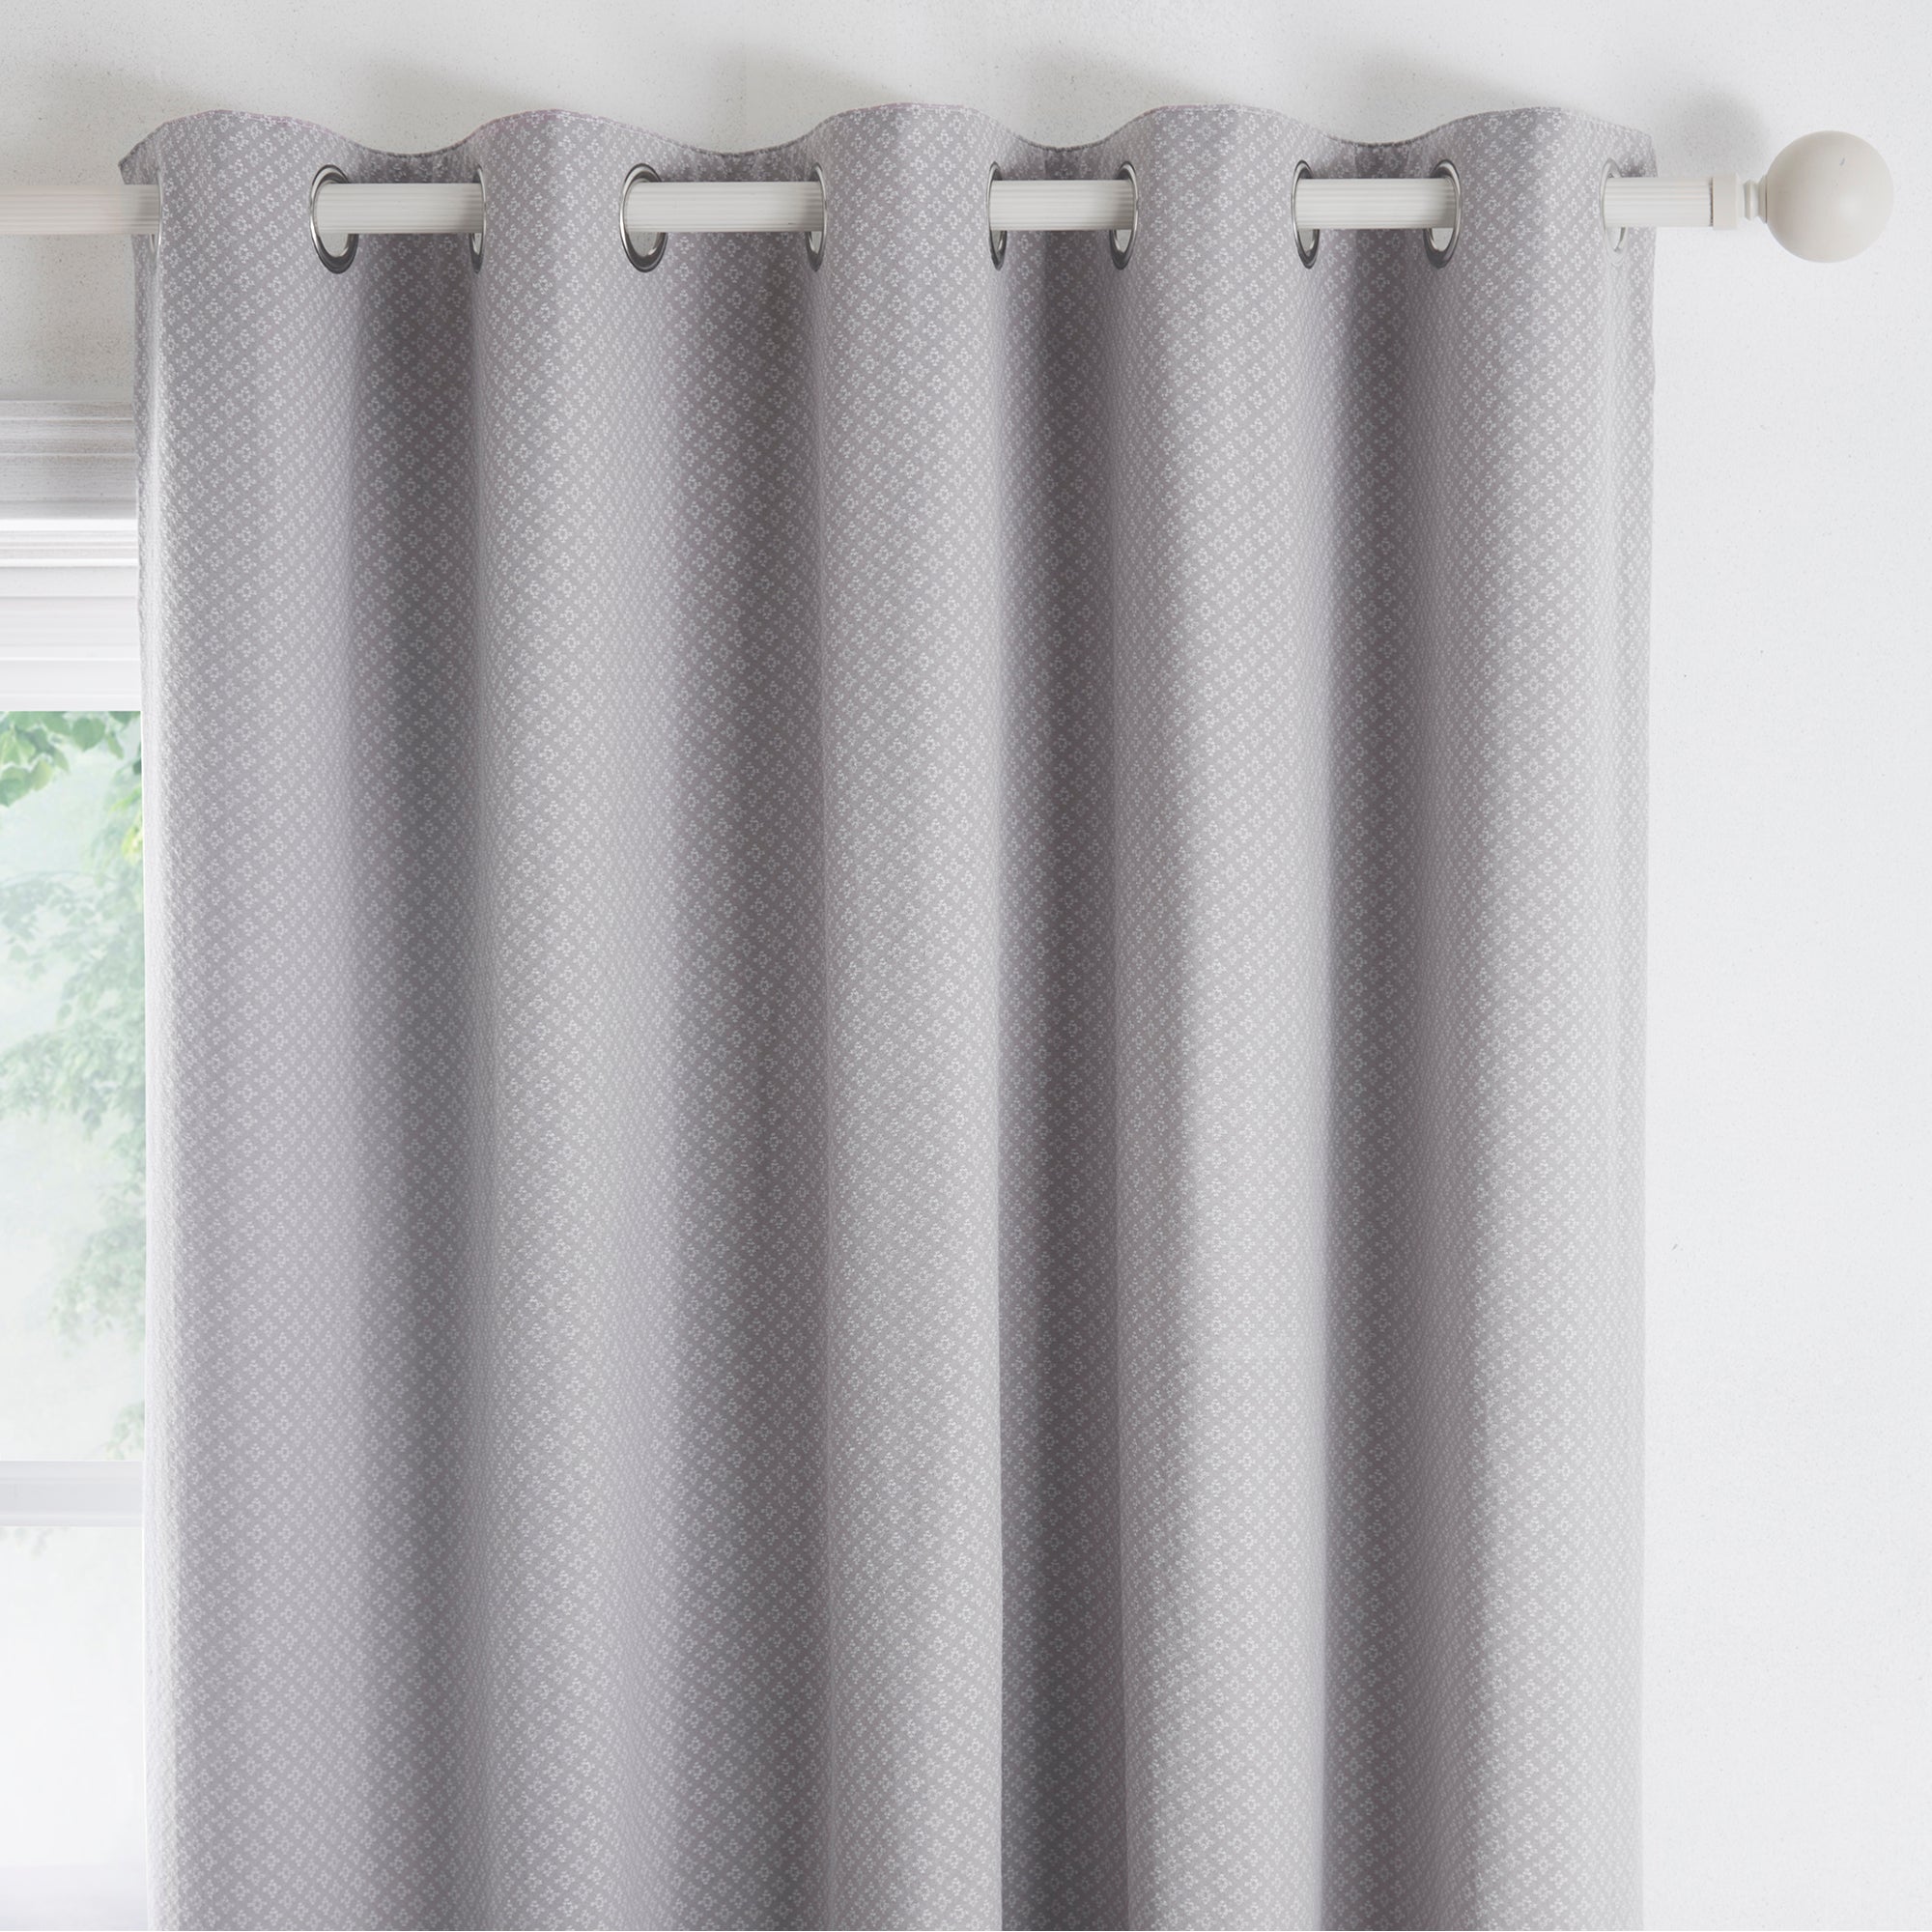 Indiana - Jacquard Pair of Eyelet Curtains in Silver - by D&D Design